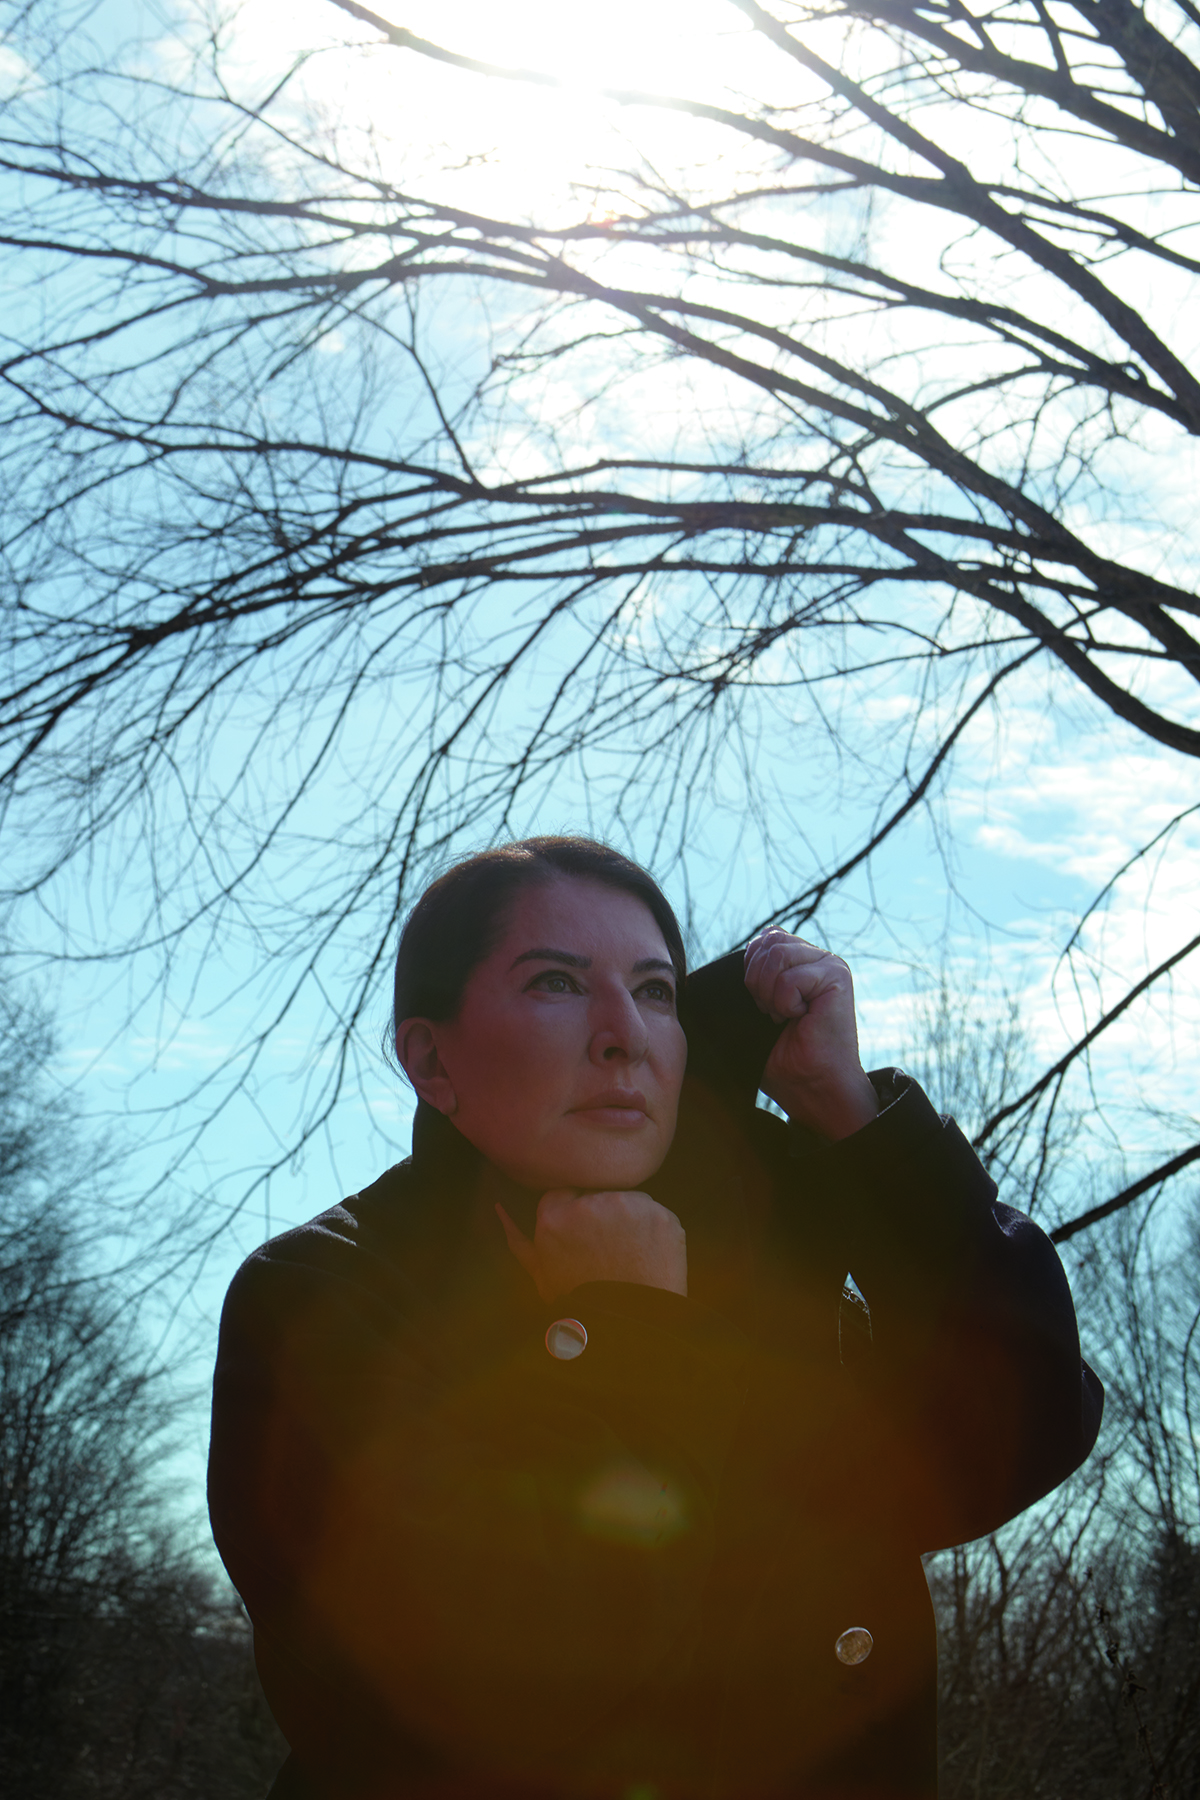 A woman outside by a tree with clouds in the sky wearing a black coat